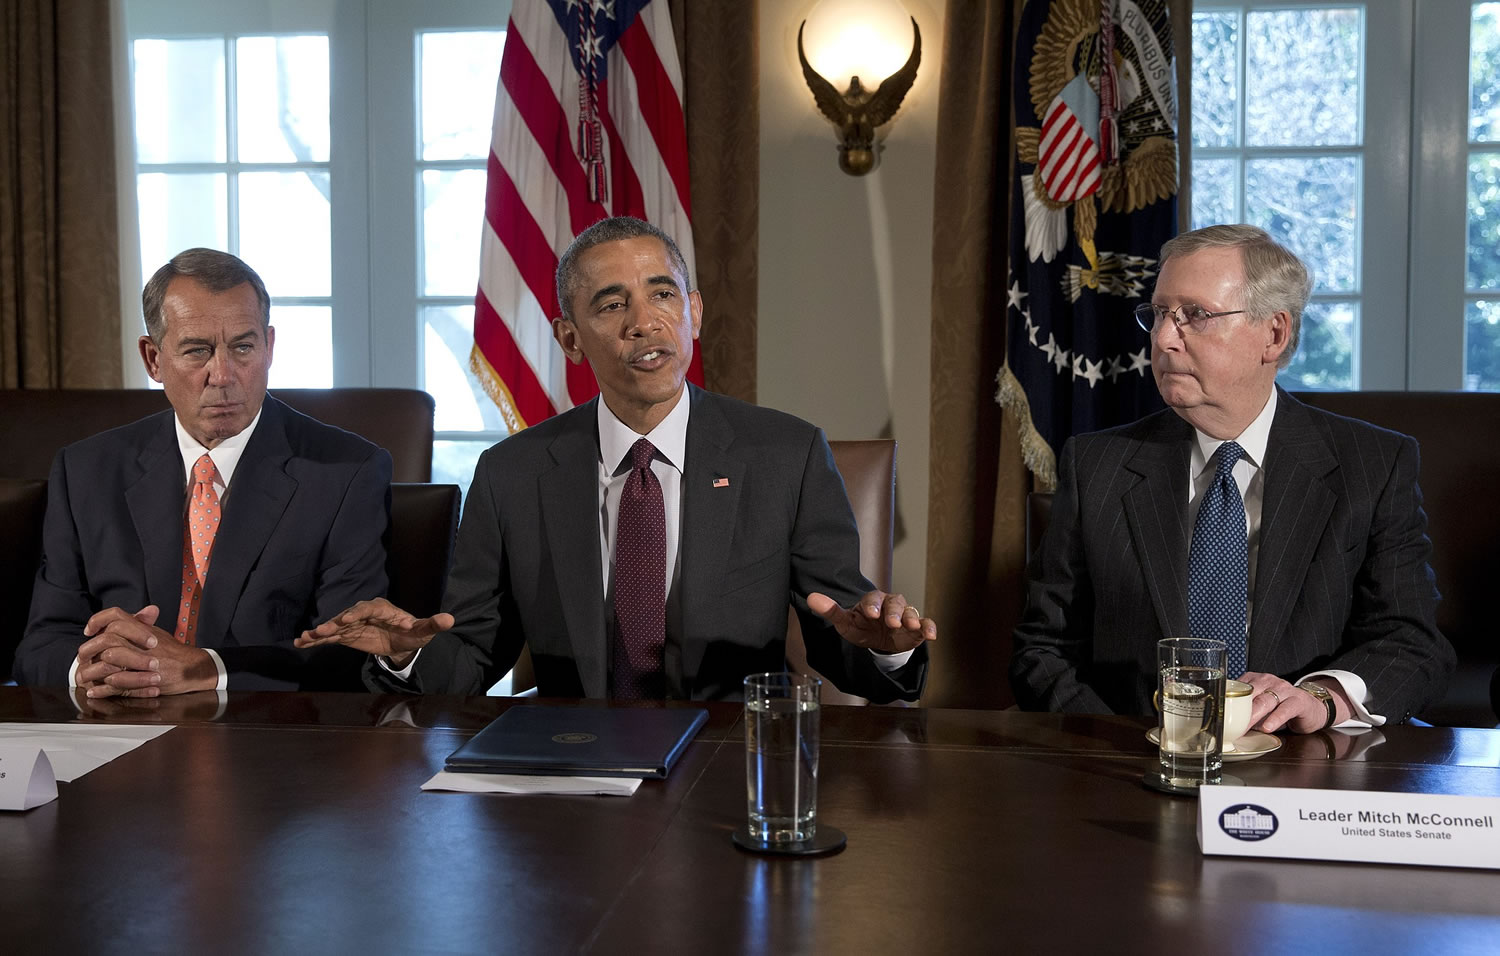 President Barack Obama, center, joined by House Speaker John Boehner of Ohio, left, and Senate Majority Leader Mitch McConnell of Kentucky speaks to media Tuesday at the White House before his meeting with bipartisan, bicameral leadership of Congress to discuss a wide range of issues.